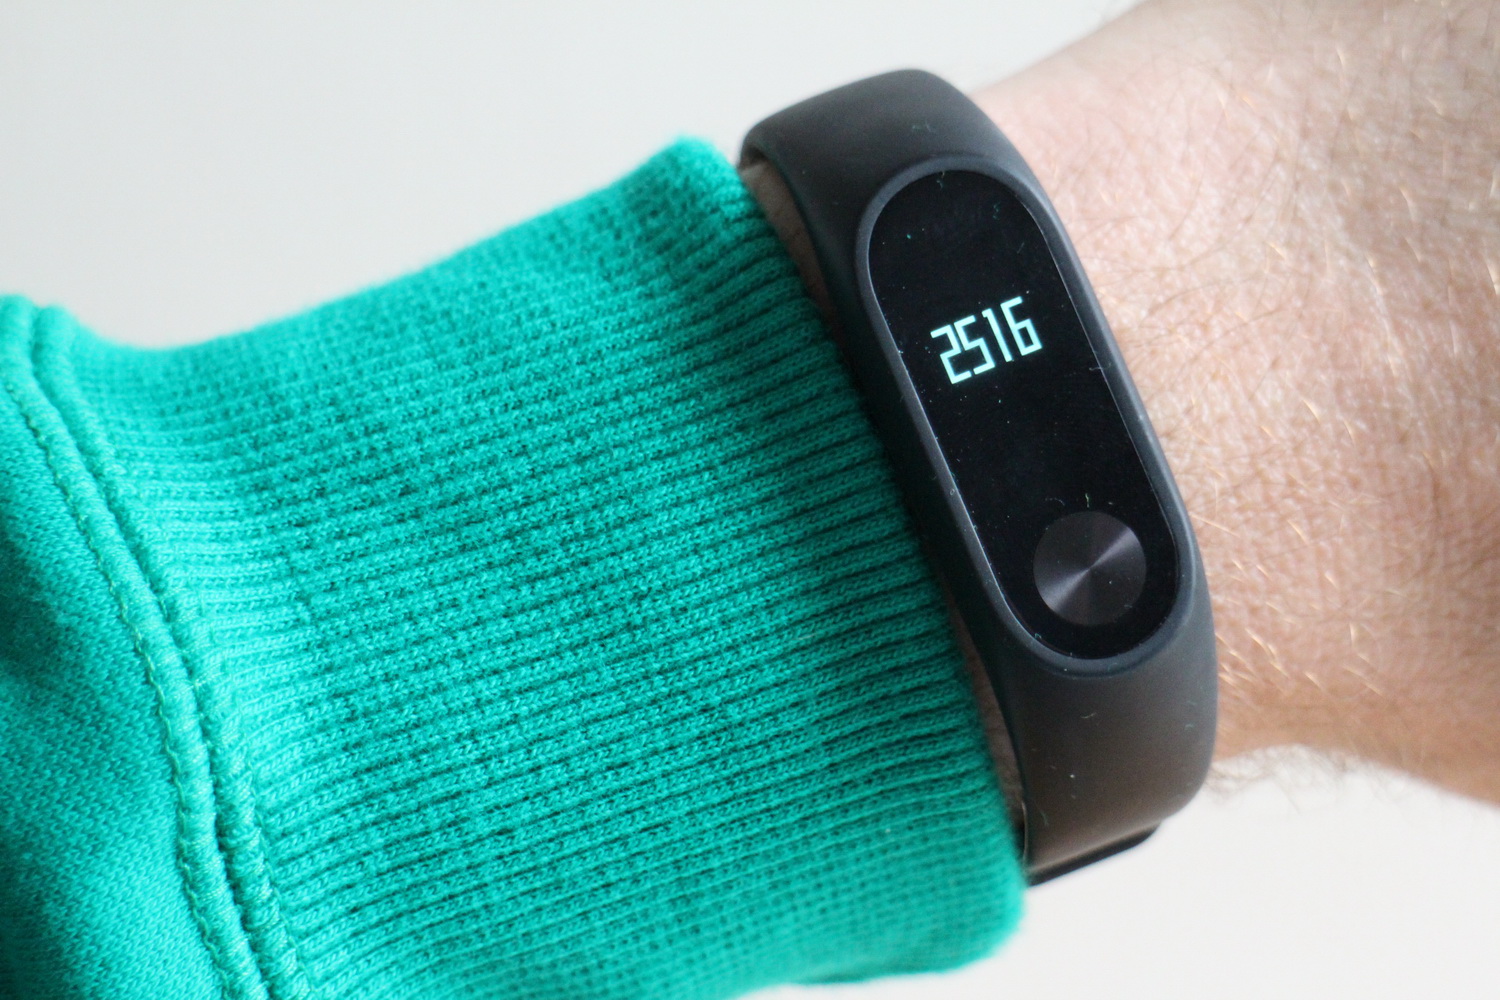 All You Need (and Want) To Know About The Xiaomi Mi Band 2